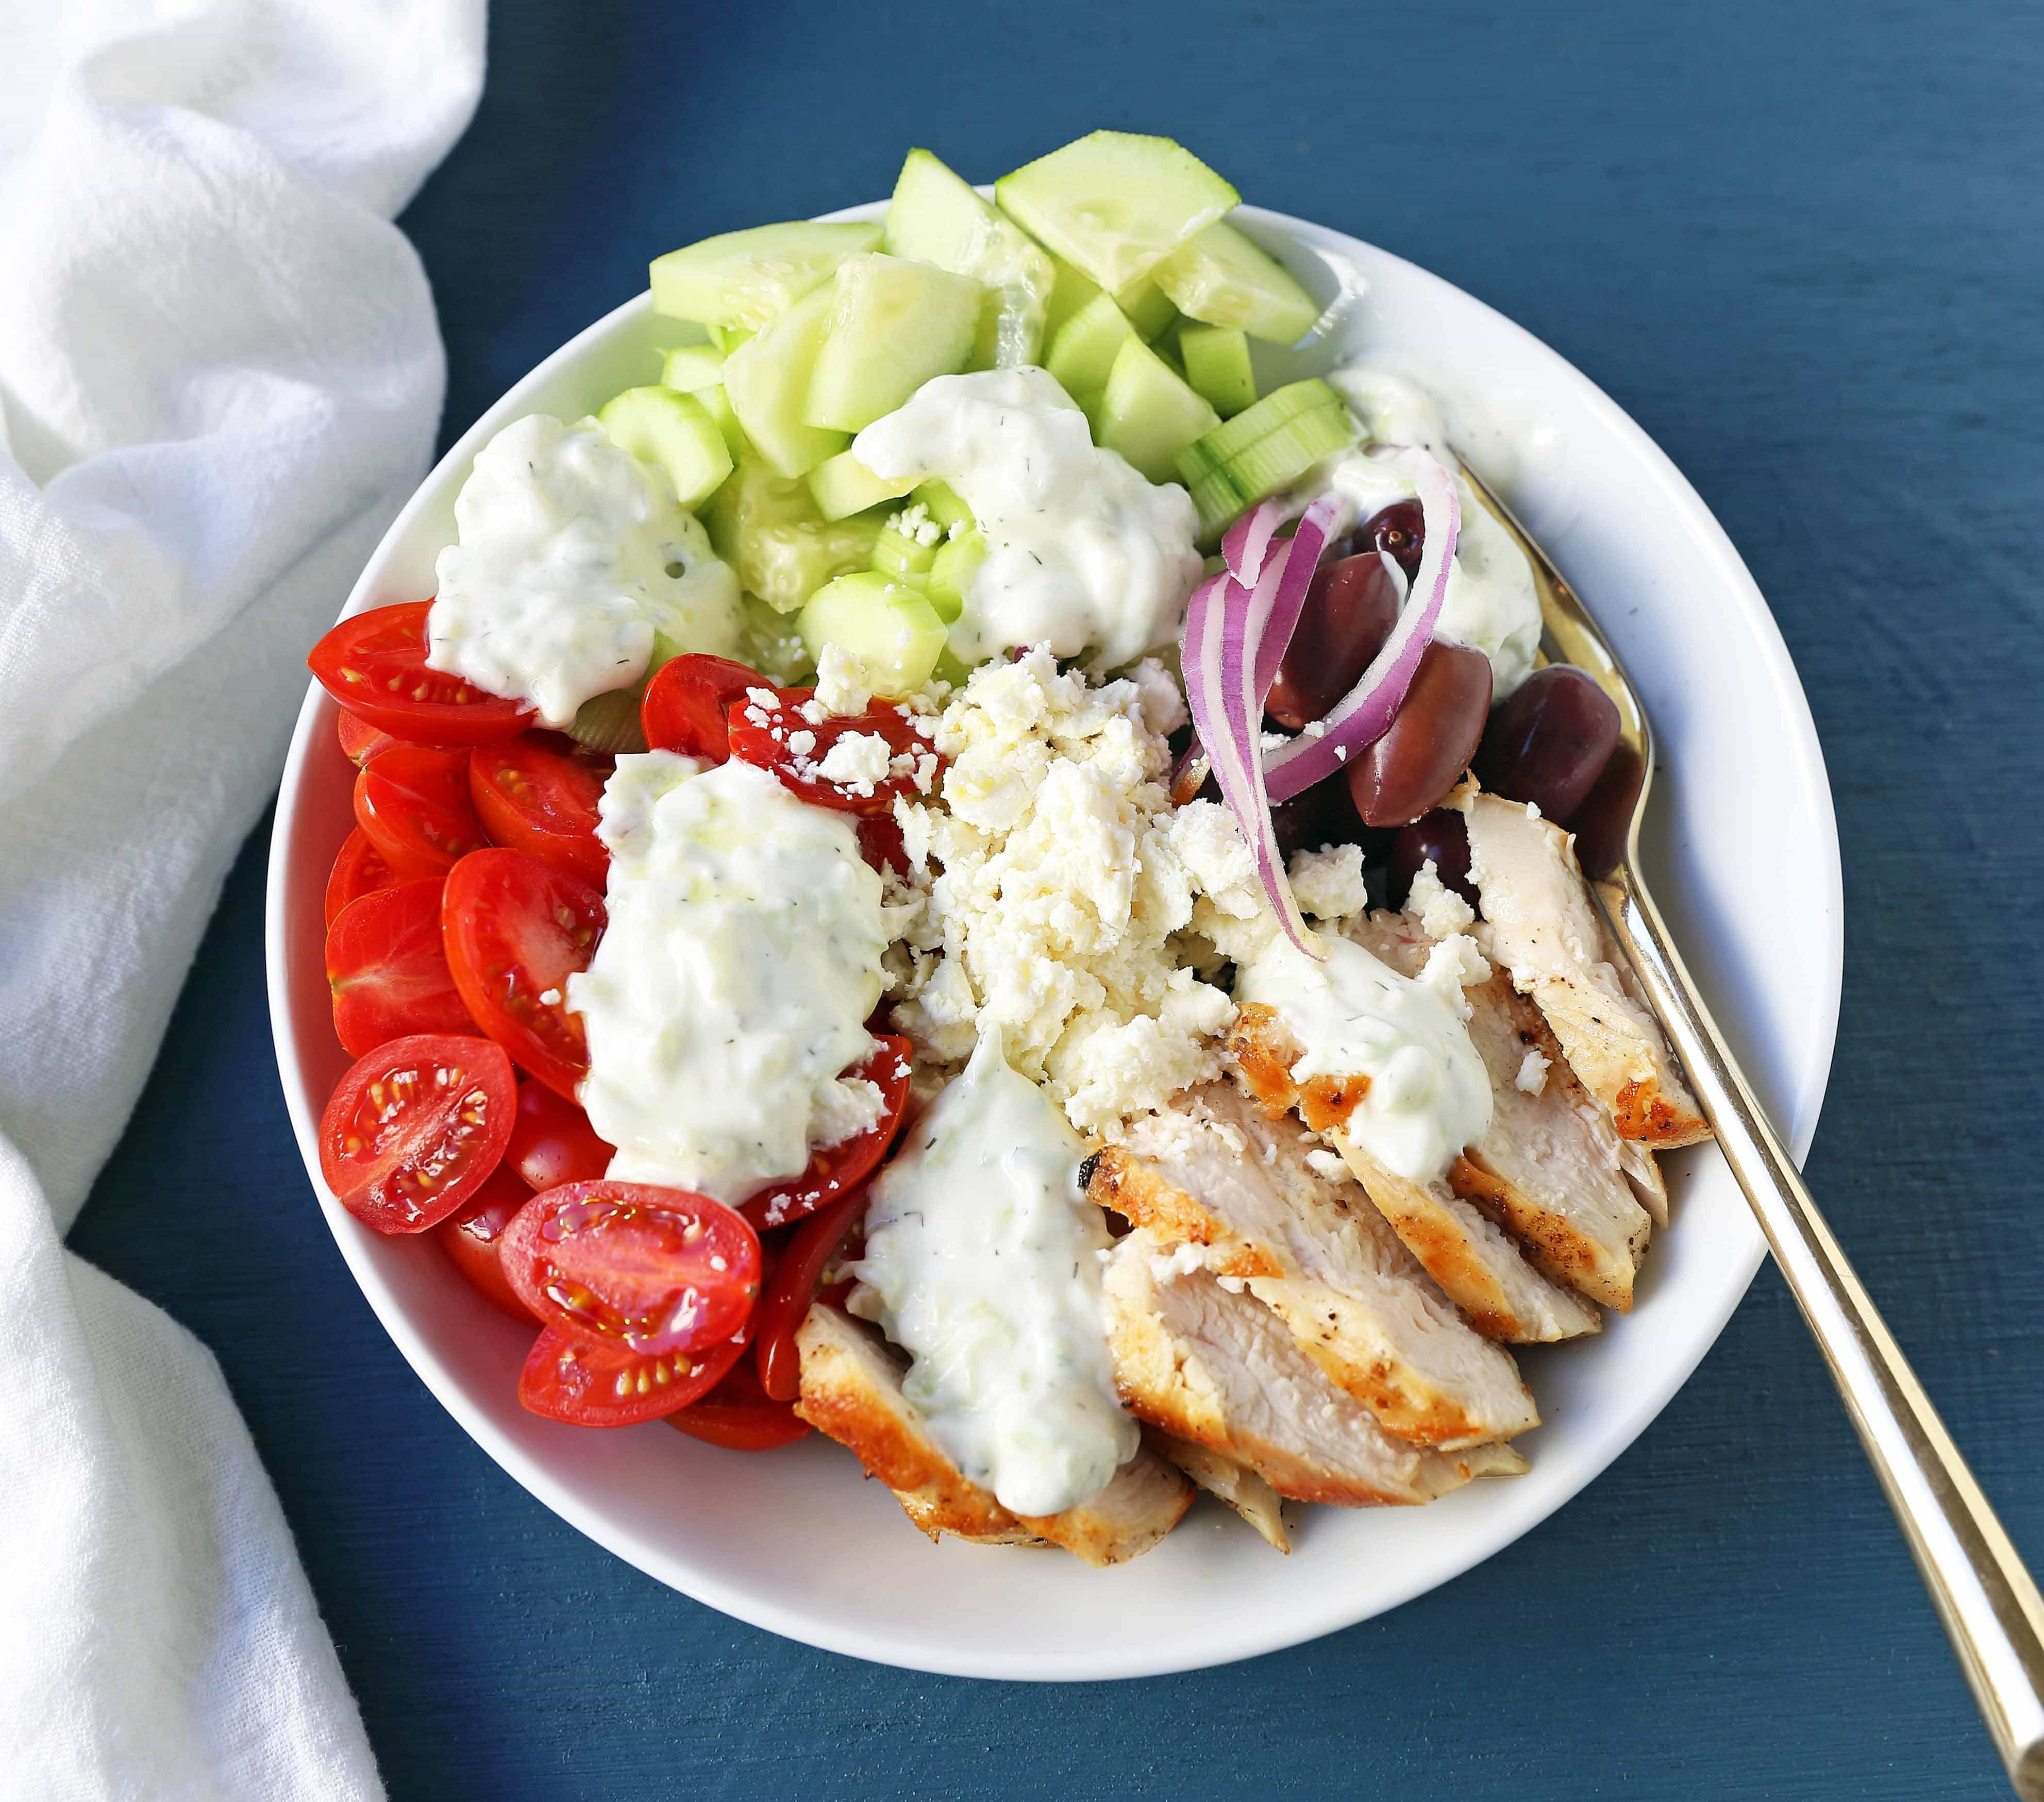 Greek Chicken Bowls. Grilled Greek Lemon Chicken, cucumber, tomatoes, red onion, kalamata olives, feta cheese, and homemade tzatziki sauce all in one bowl. A high-protein and low carb meal! www.modernhoney.com #greekchickenbowls #greekchickenbowl #greekfood #glutenfree